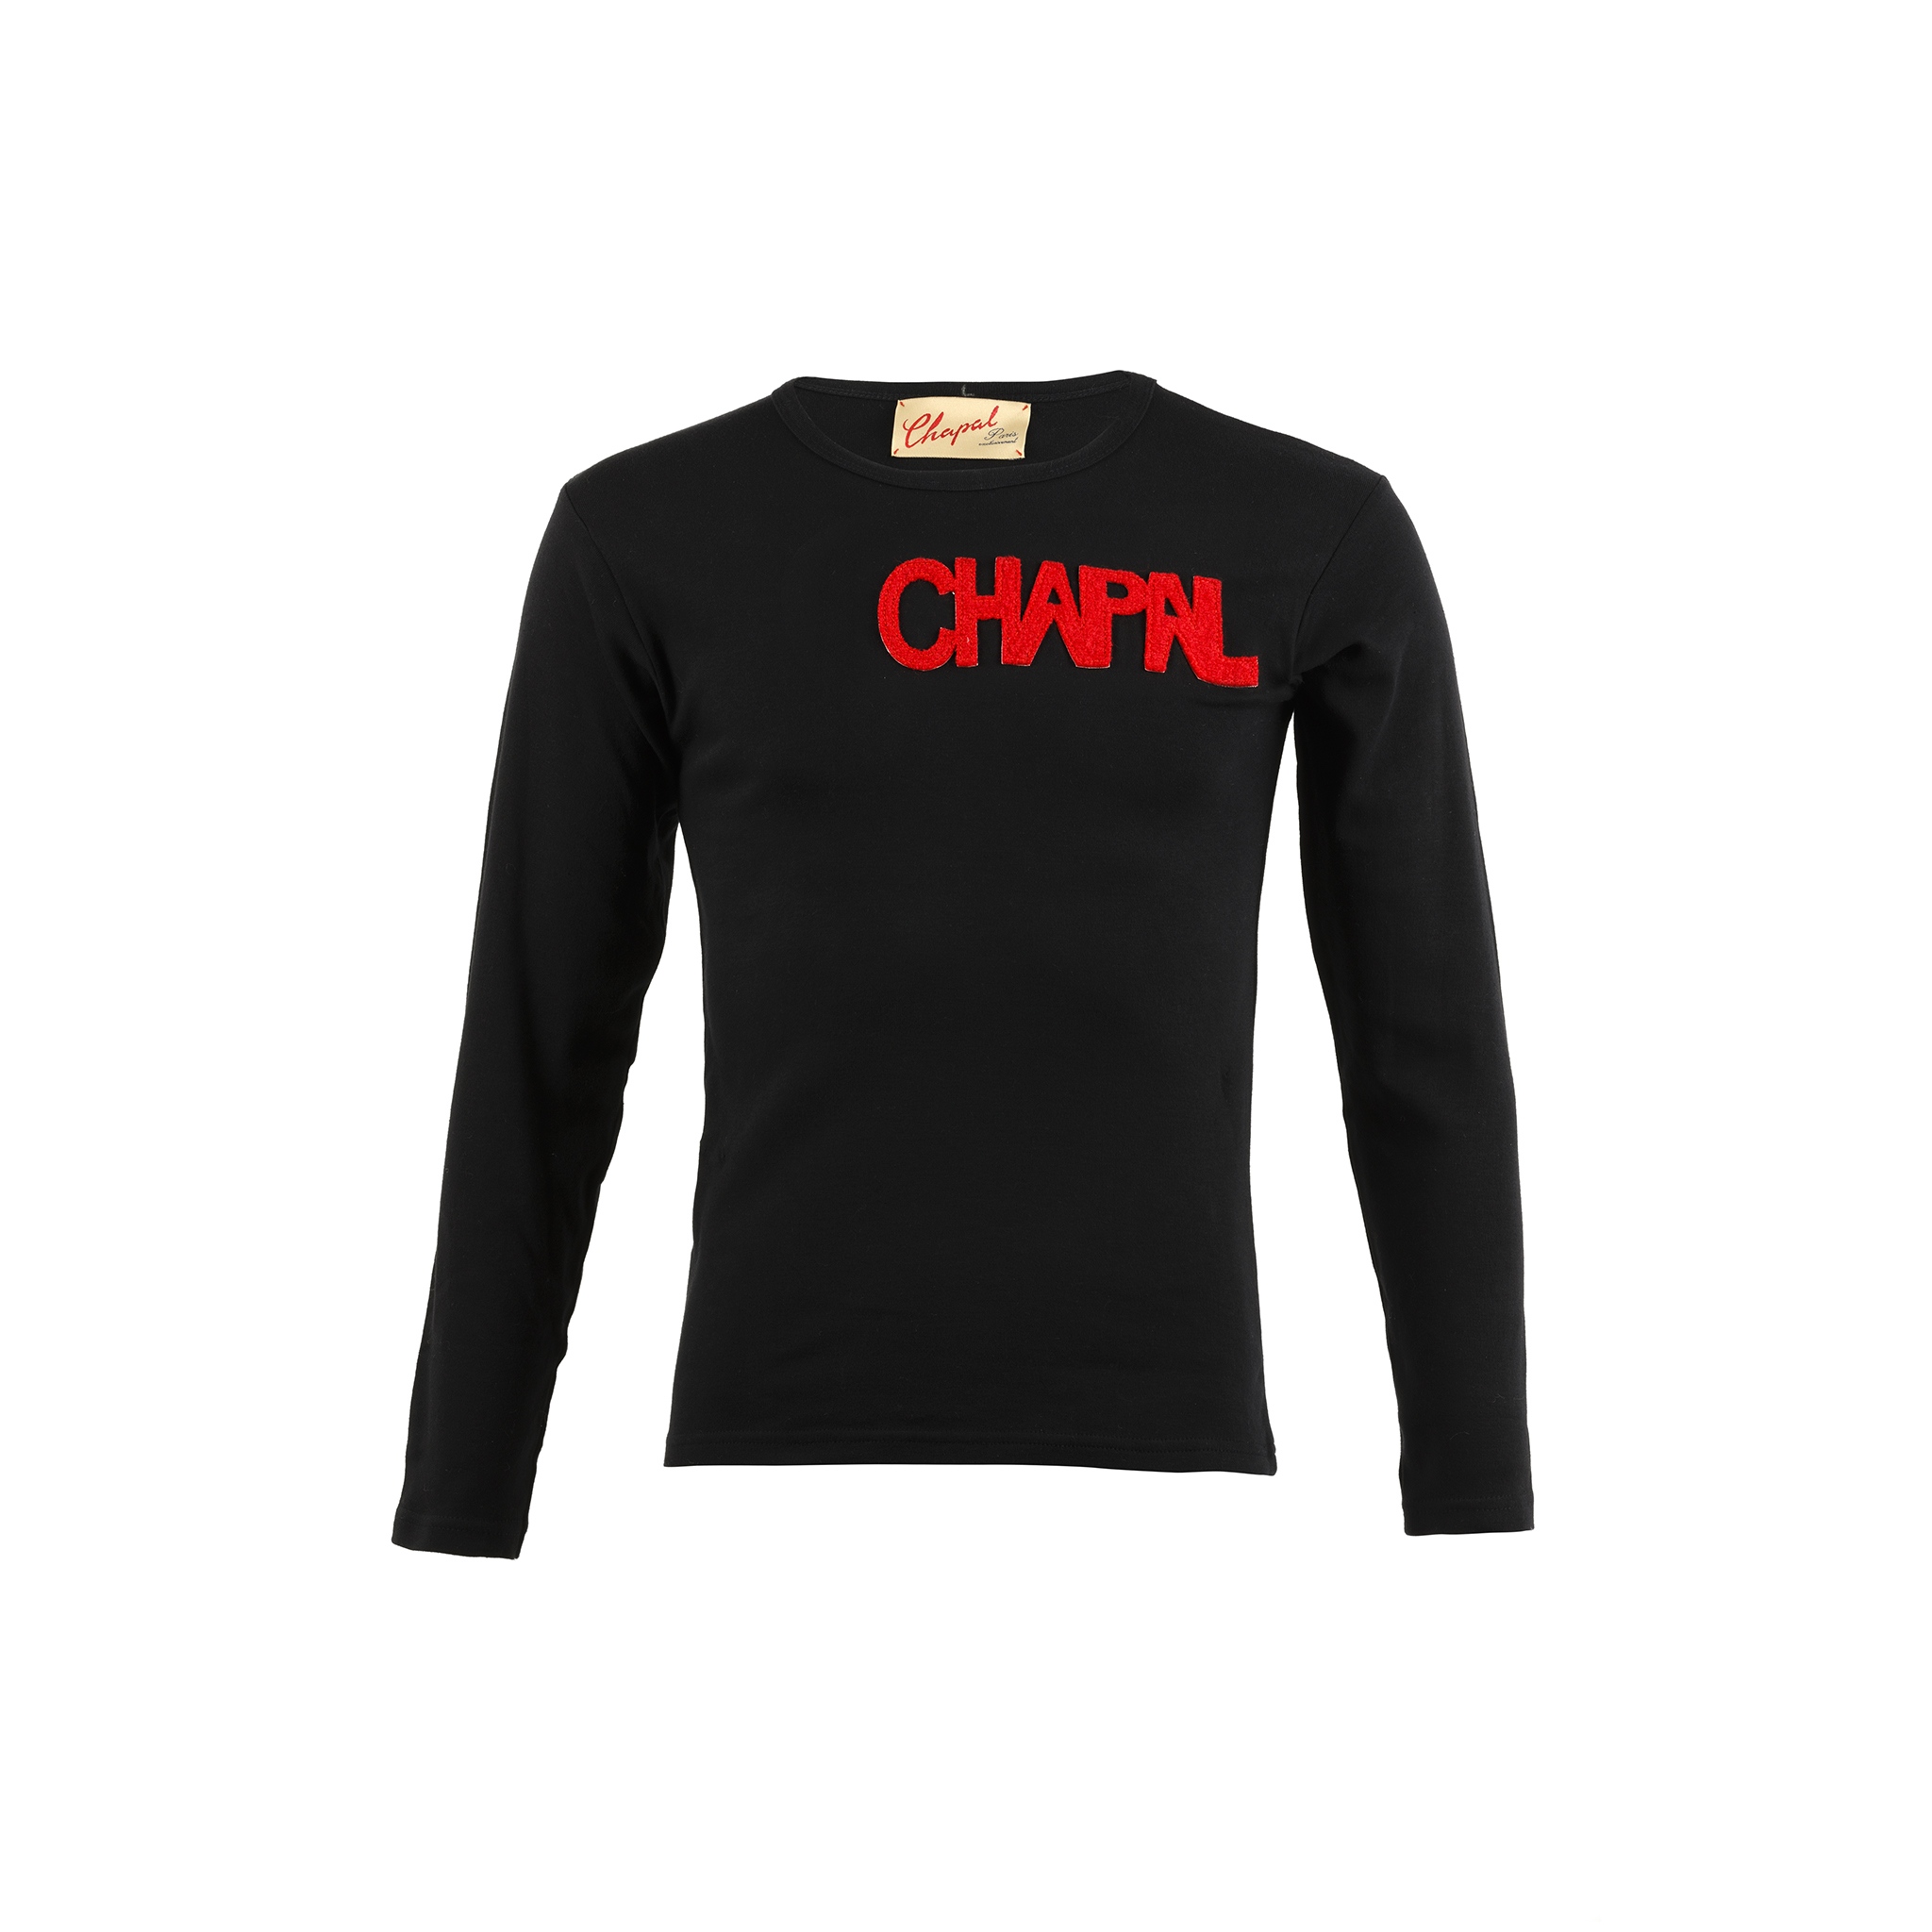 T-shirt Letters Long Sleeves - Cotton jersey and wool - Black and red colors